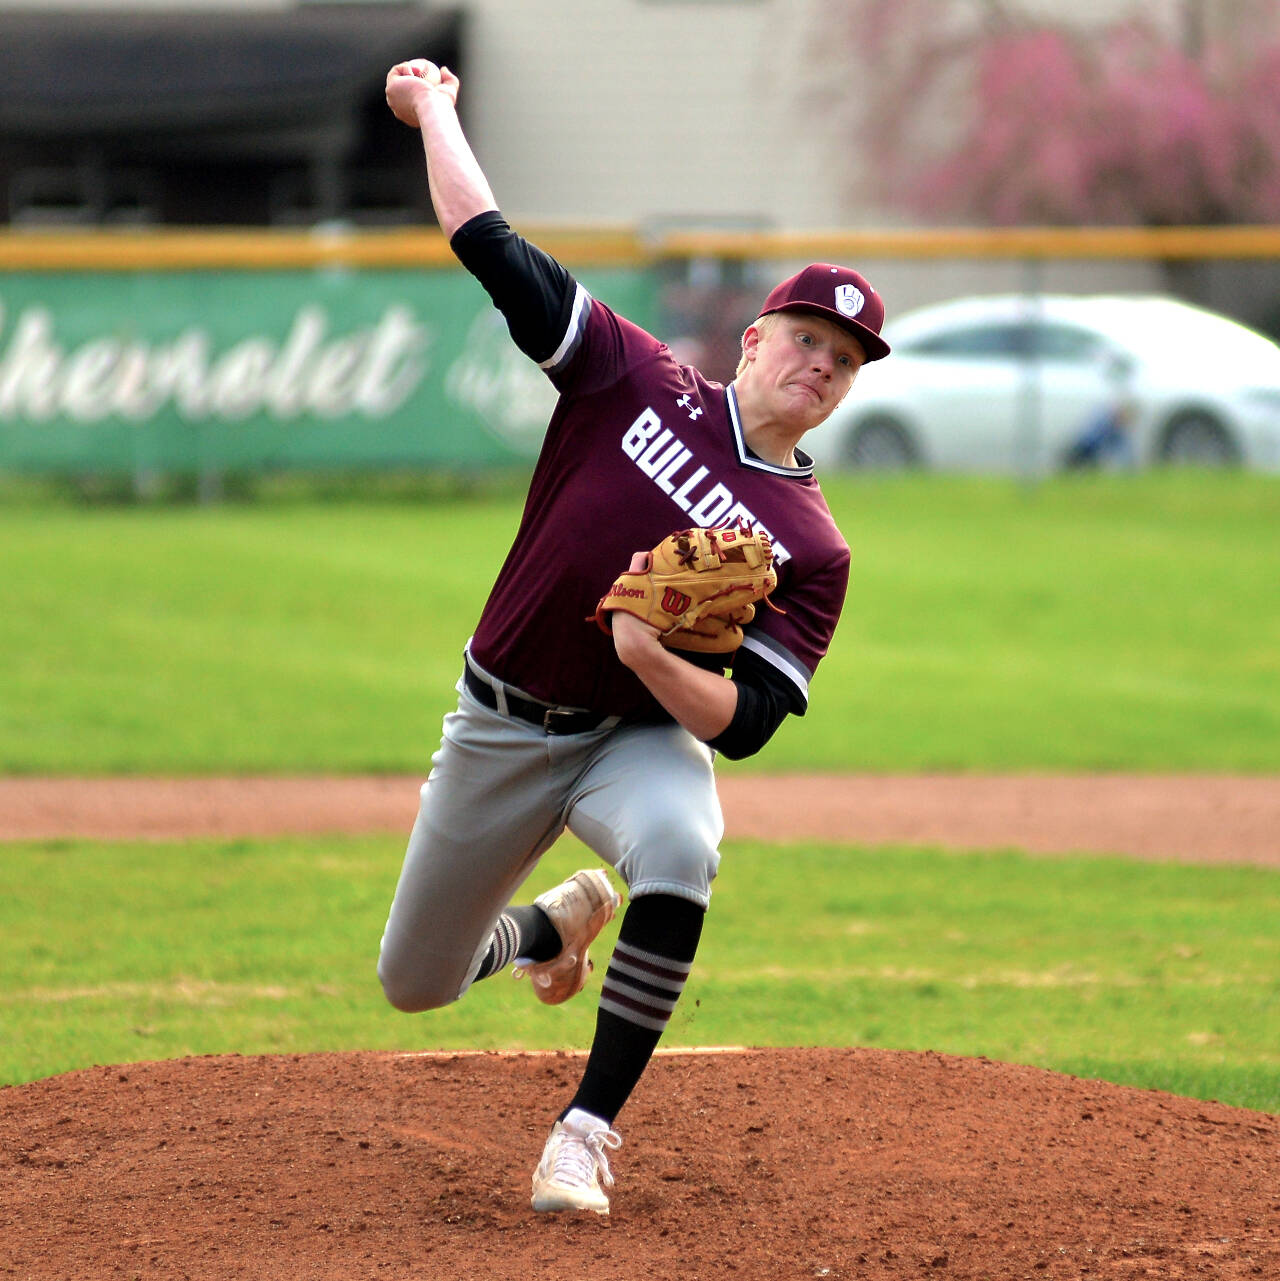 RYAN SPARKS | THE DAILY WORLD Montesano pitcher Camden Taylor picked up the win in the second game of a doubleheader against Hoquiam on Monday in Montesano.